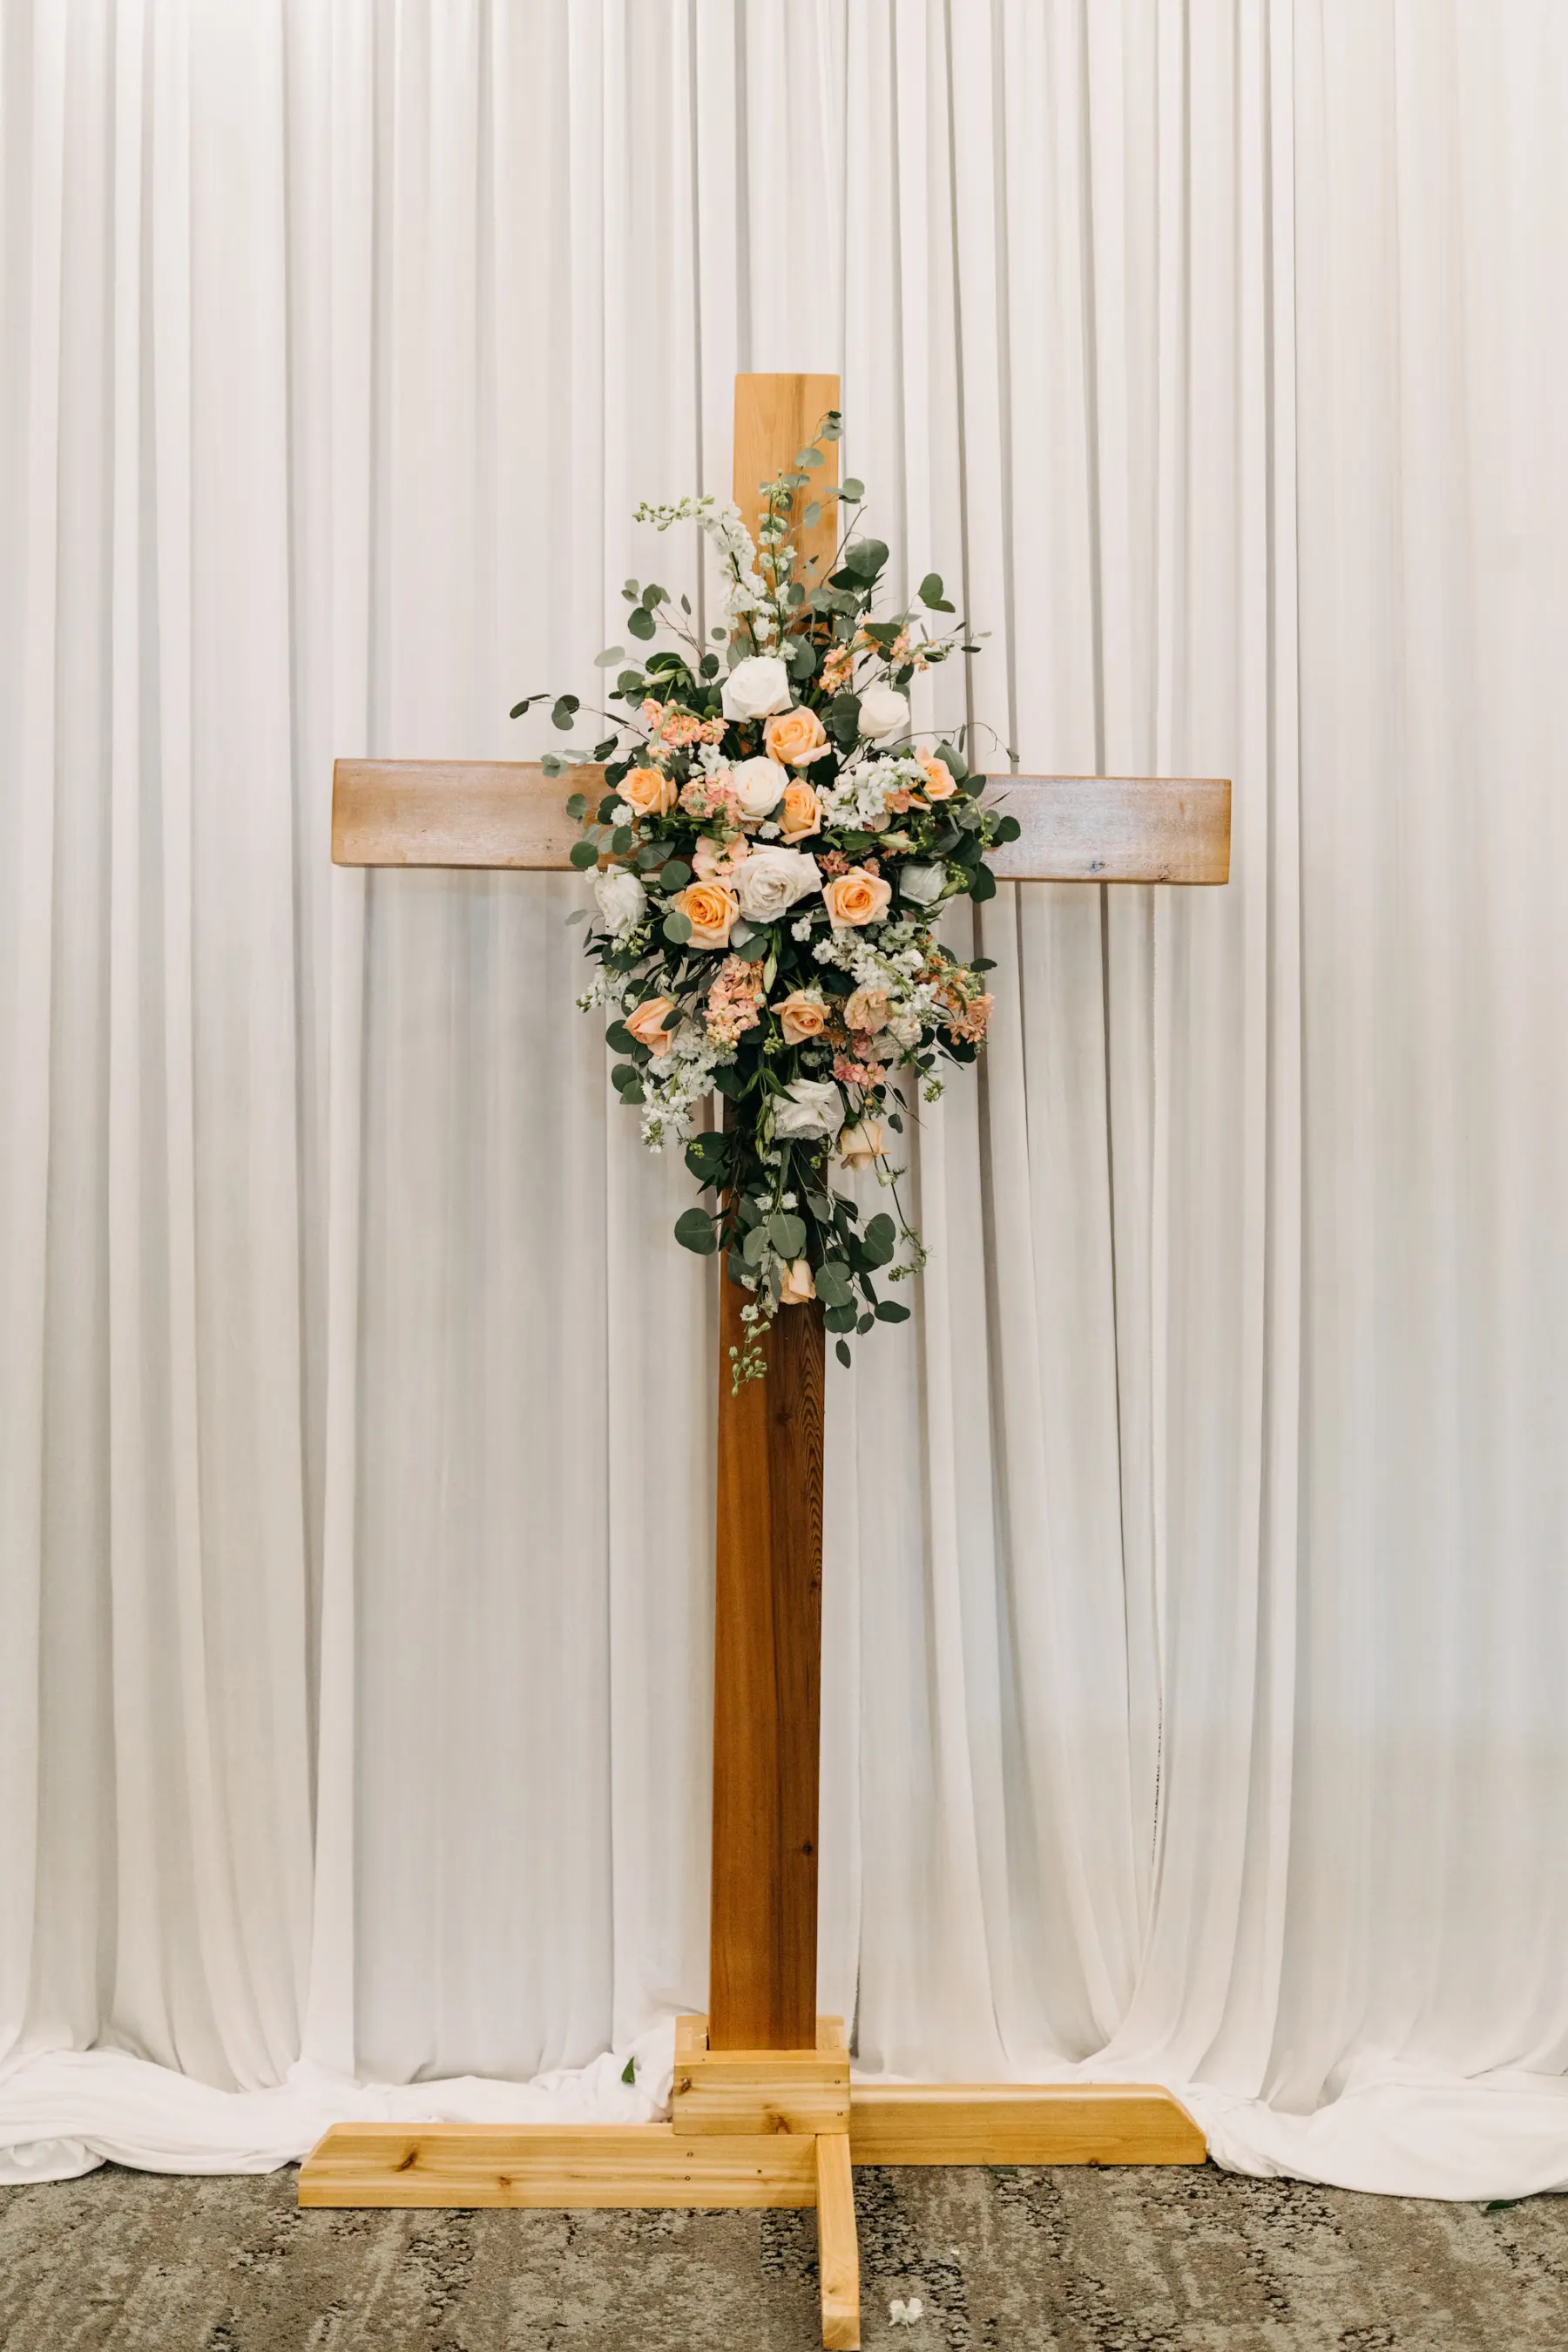 Classic White and Greenery Wedding Ceremony Floral Inspiration with Cross at Altar | Tampa Florist Save the Date Florida